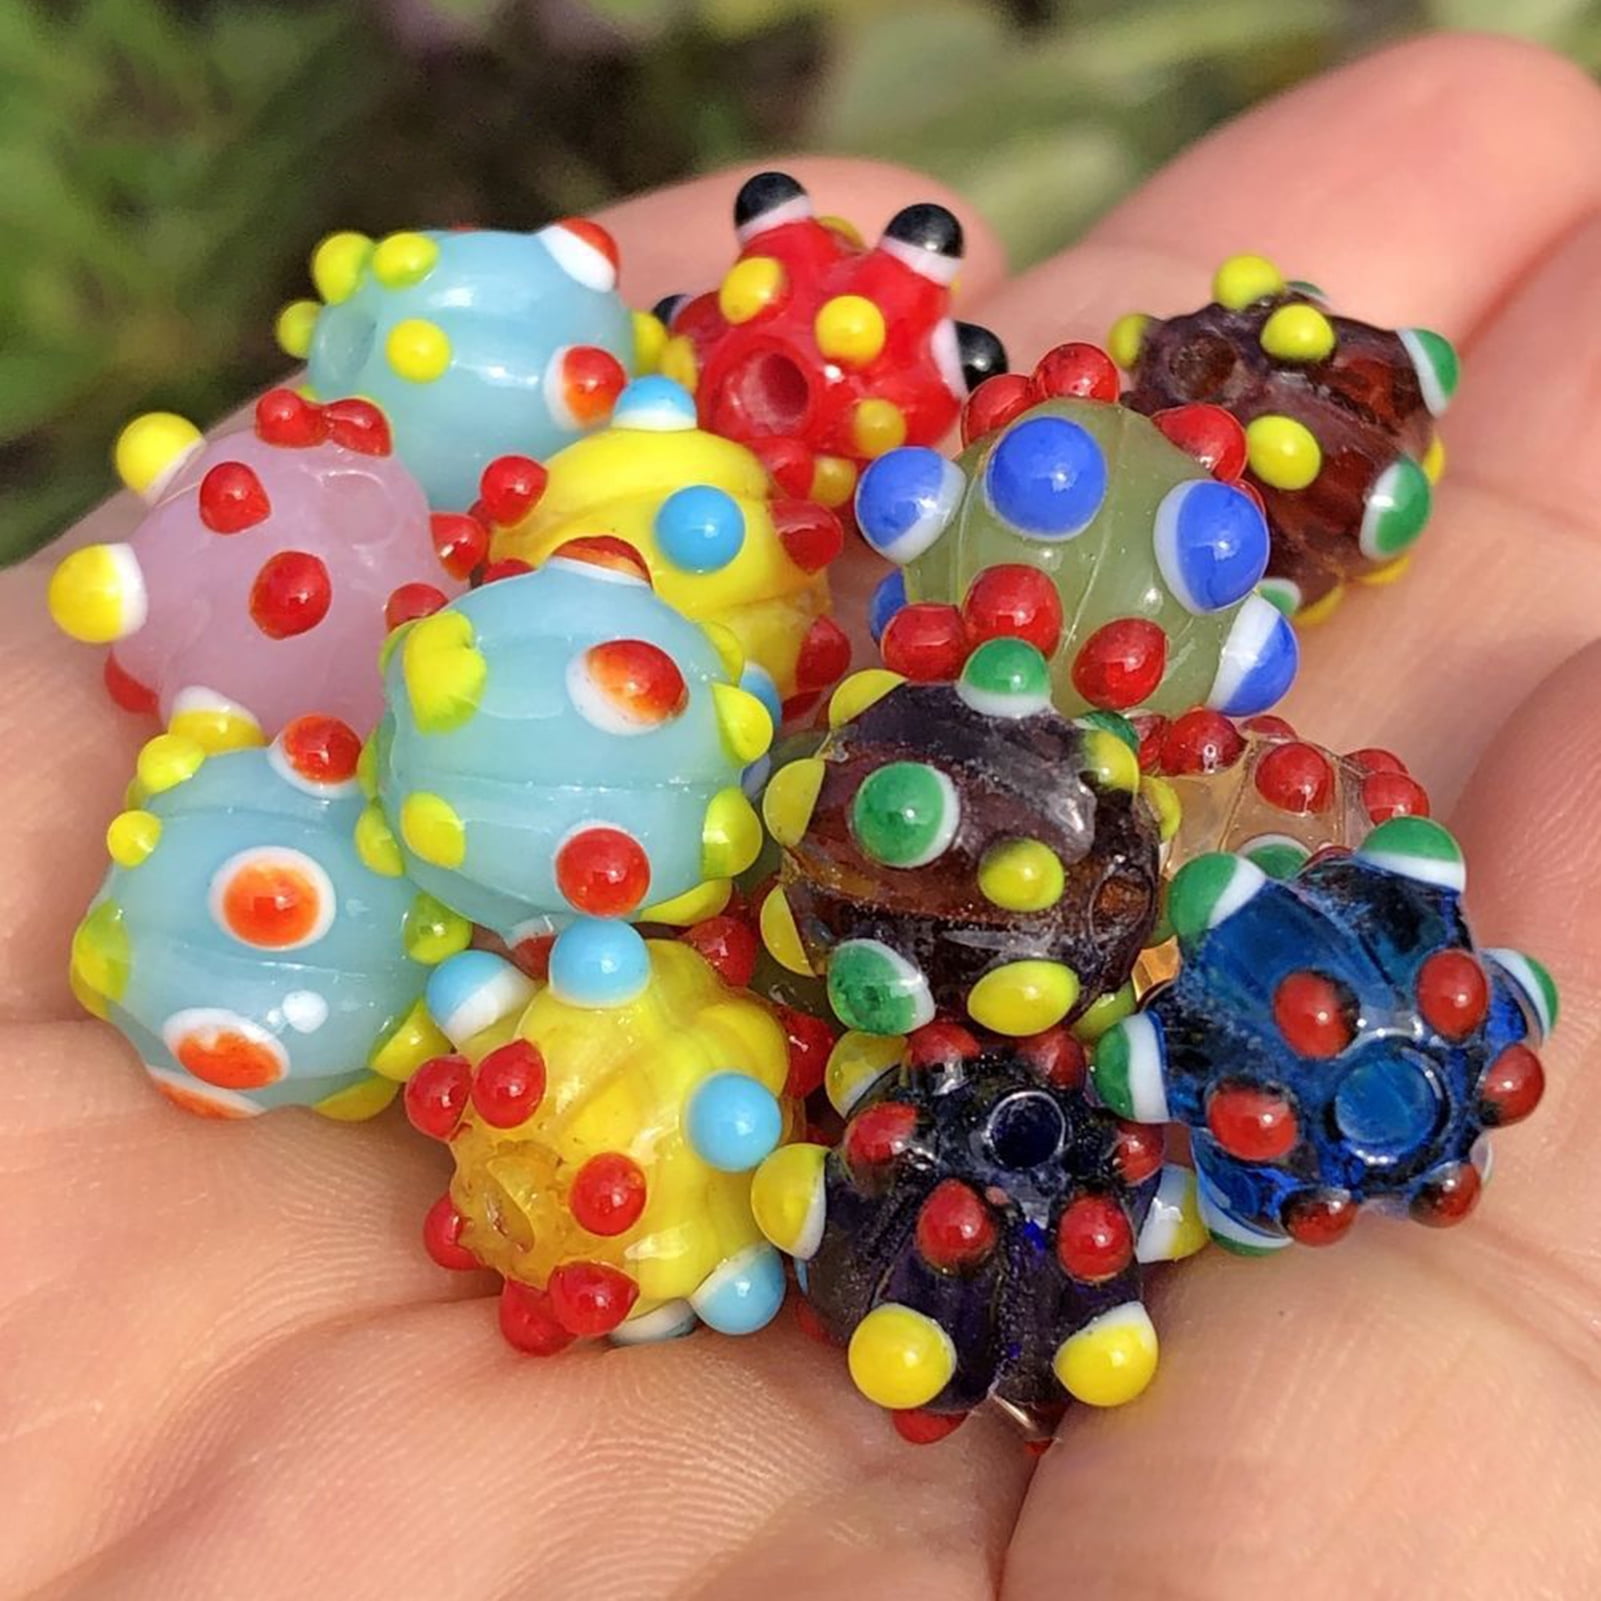 KABOER Stained Glass Mini Beads Loose Beads DIY Cross Stitch Bead Ornament  Beaded 2mm Rice Beads Combination 